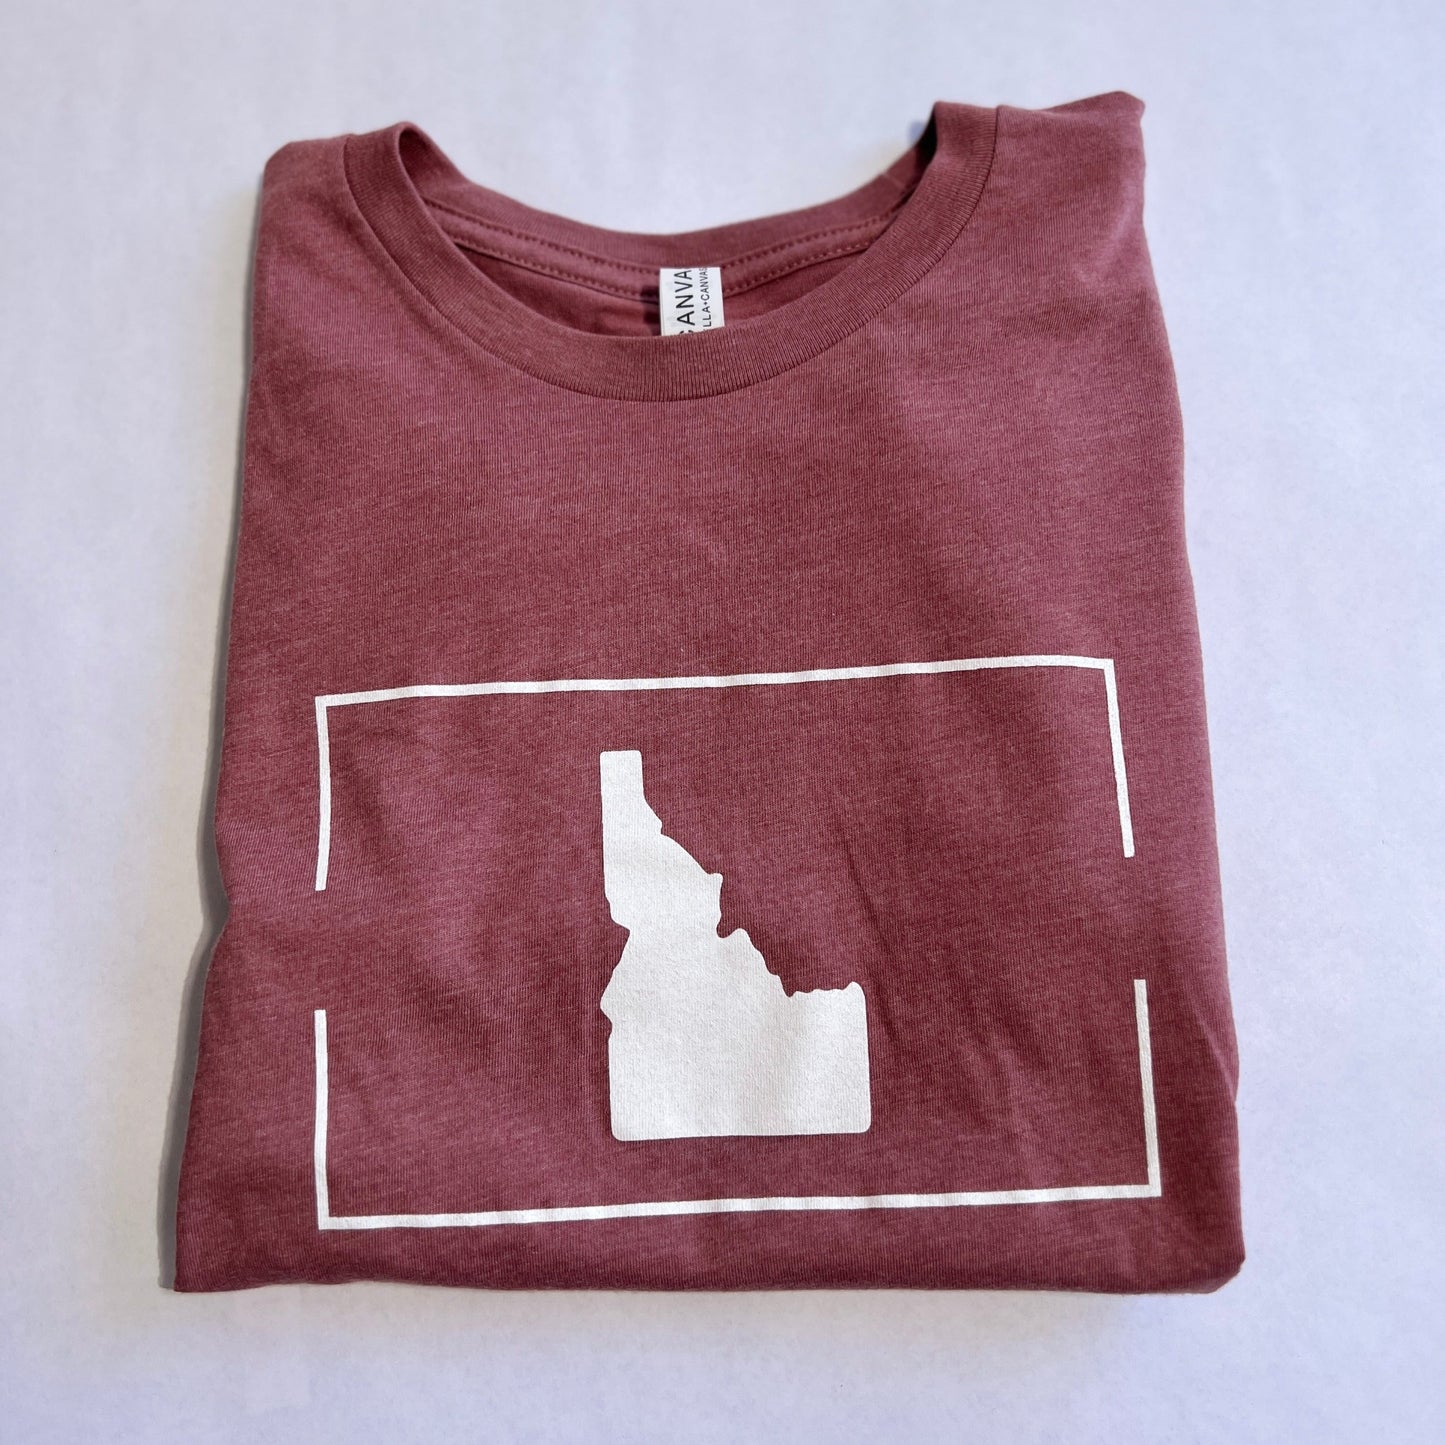 This Idaho T Shirt is designed by TatorJo, an Idaho Apparel Company. The Idaho T Shirt has a simple and clean classic Idaho on it. This Idaho T Shirt is screen printed in Idaho and owned and operated in Idaho. This Idaho T Shirt is cozy and soft on a preshrunk t shirt.